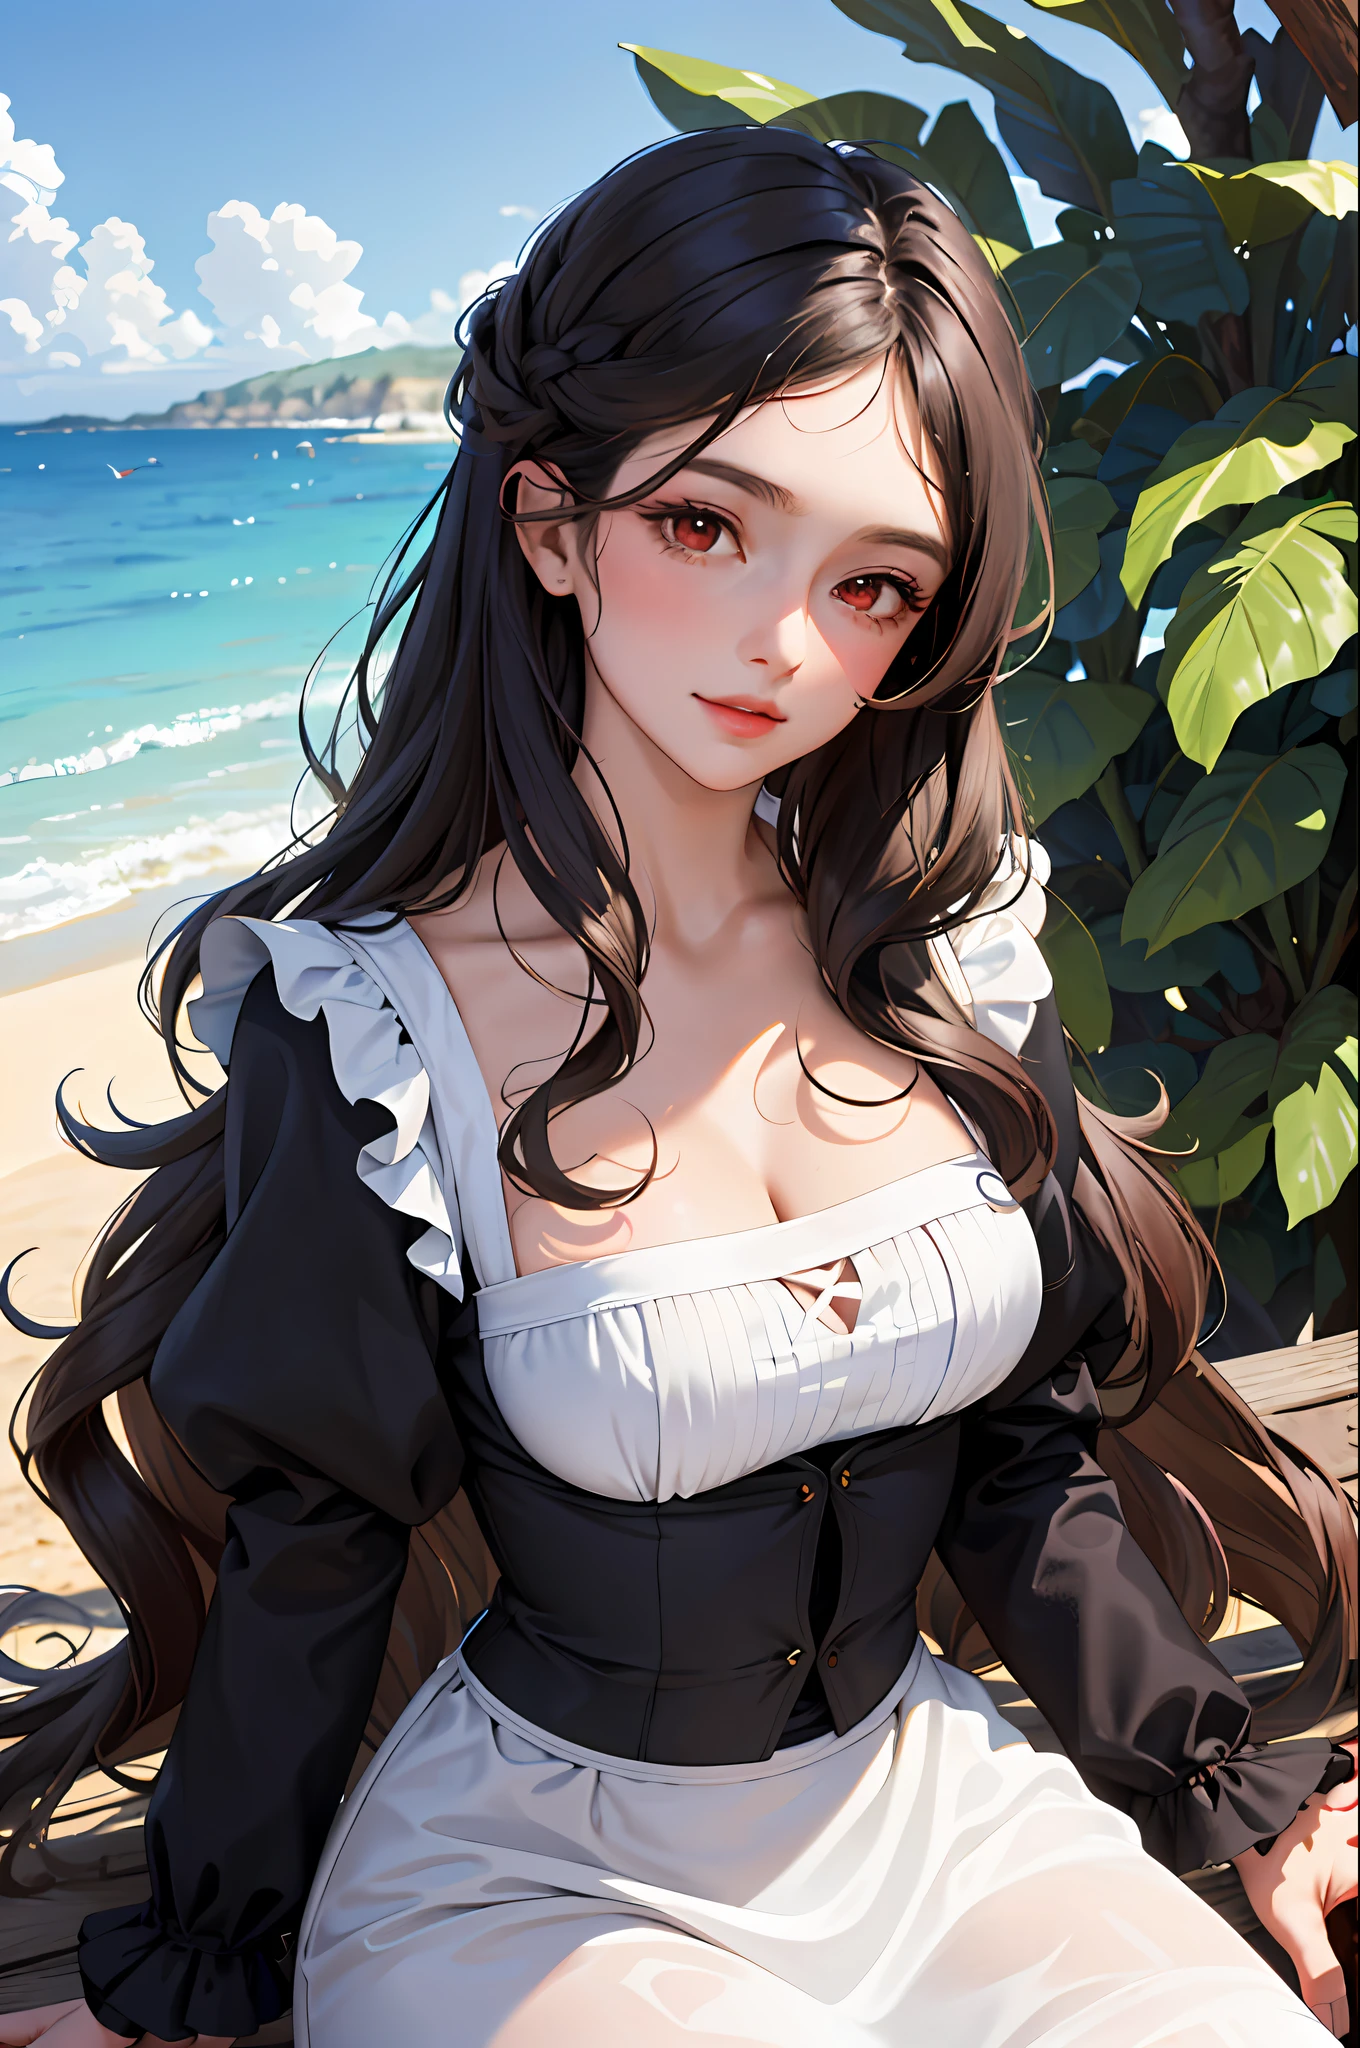 (masterpiece:1.2, best quality), (30 years old,solo, upper body:1.2), Clothing: maid attire, ((conservative attire)), Hair: loose beach waves, Makeup: natural, glowing skin, behavior: relaxed, carefree, free-spirited, location: beach, resort, sleeping against olive trees, outdoor festival, red eyes, large bust, no chest,